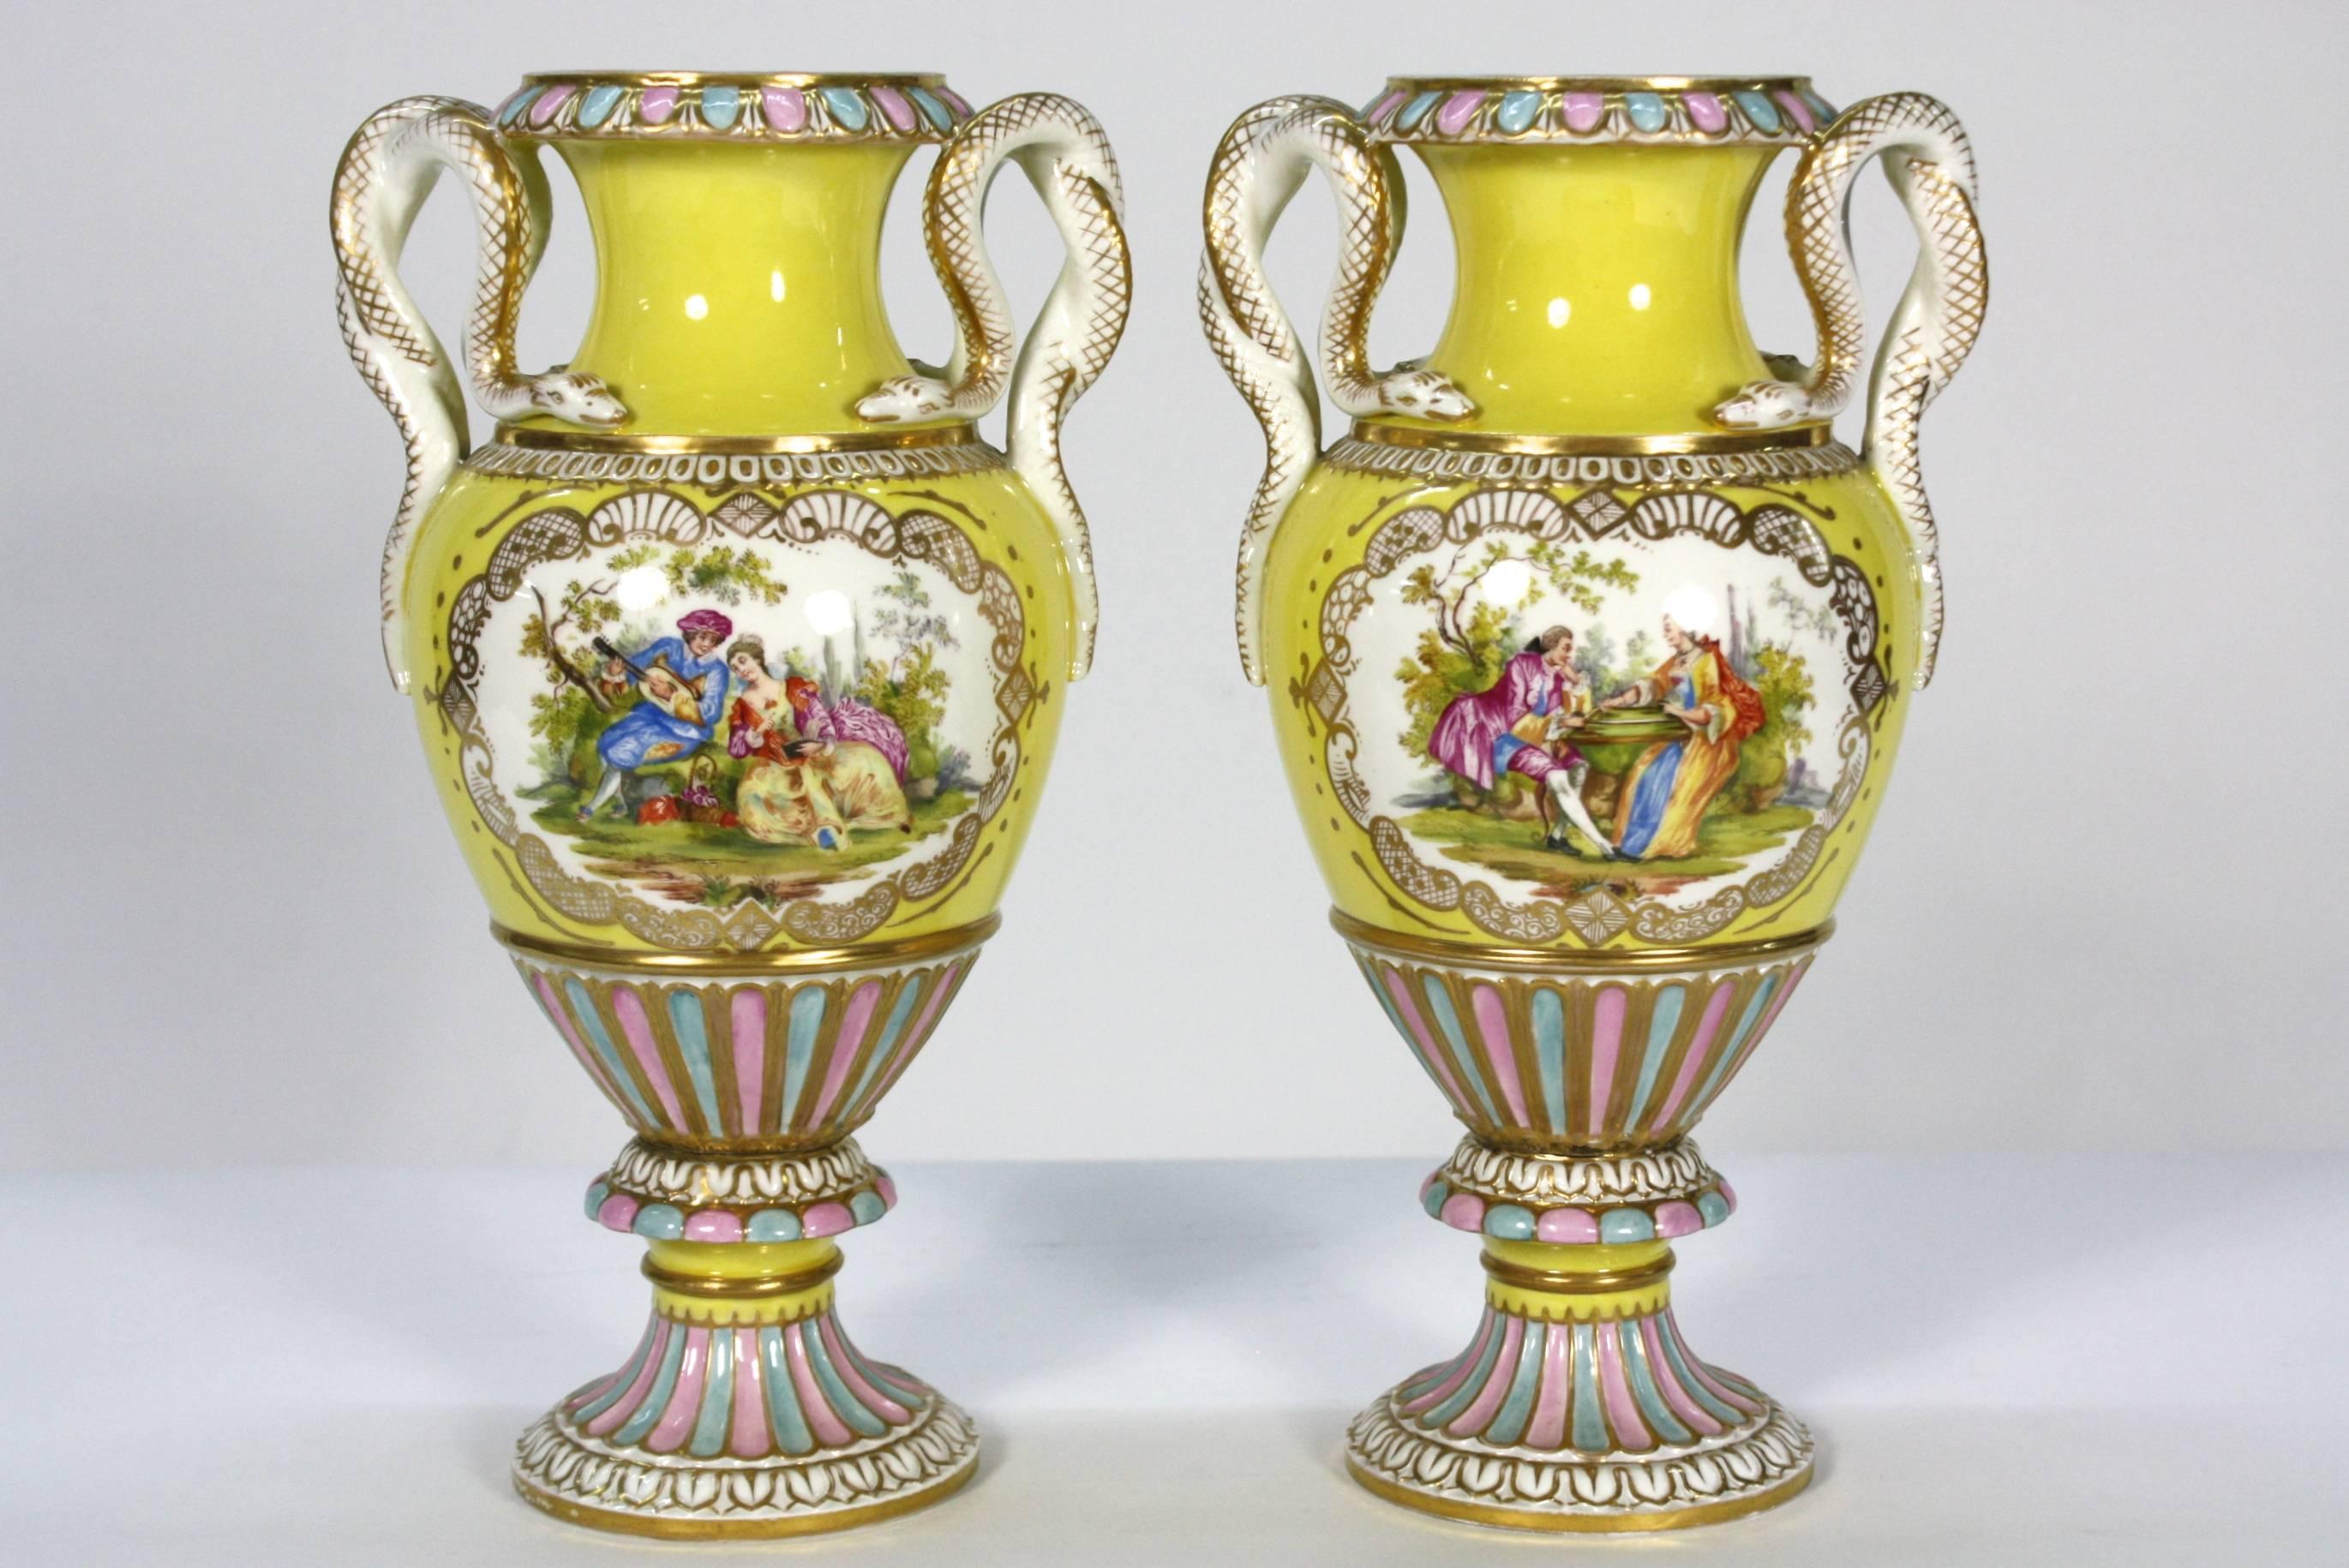 A highly-decorative pair of yellow porcelain vases, hand-painted with detailed central romantic scene, and having snake-form handles (Meissen, 19th century).